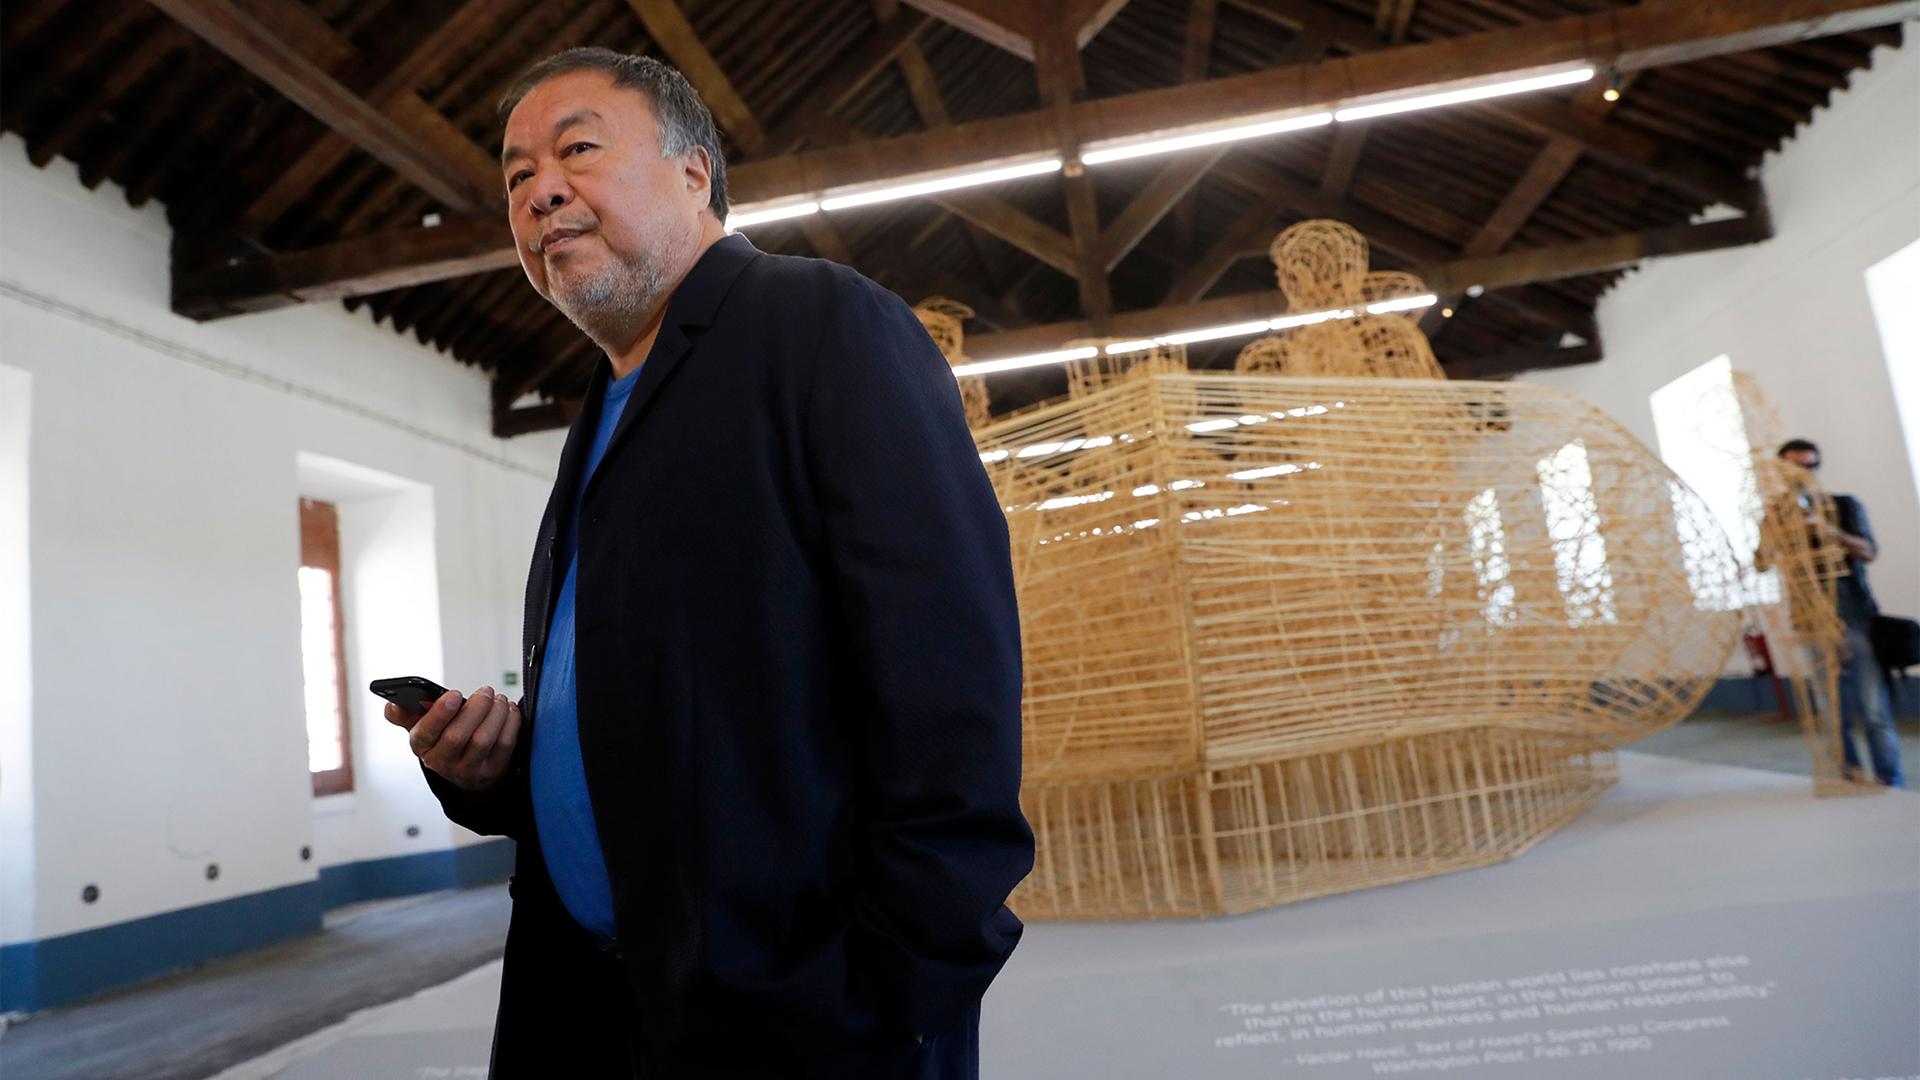 Dissident Chinese artist Ai Weiwei walks by his work "Life Cycle", a migrants' boat made of bamboo, during a press preview of his new exhibition "Rapture" in Lisbon, Portugal